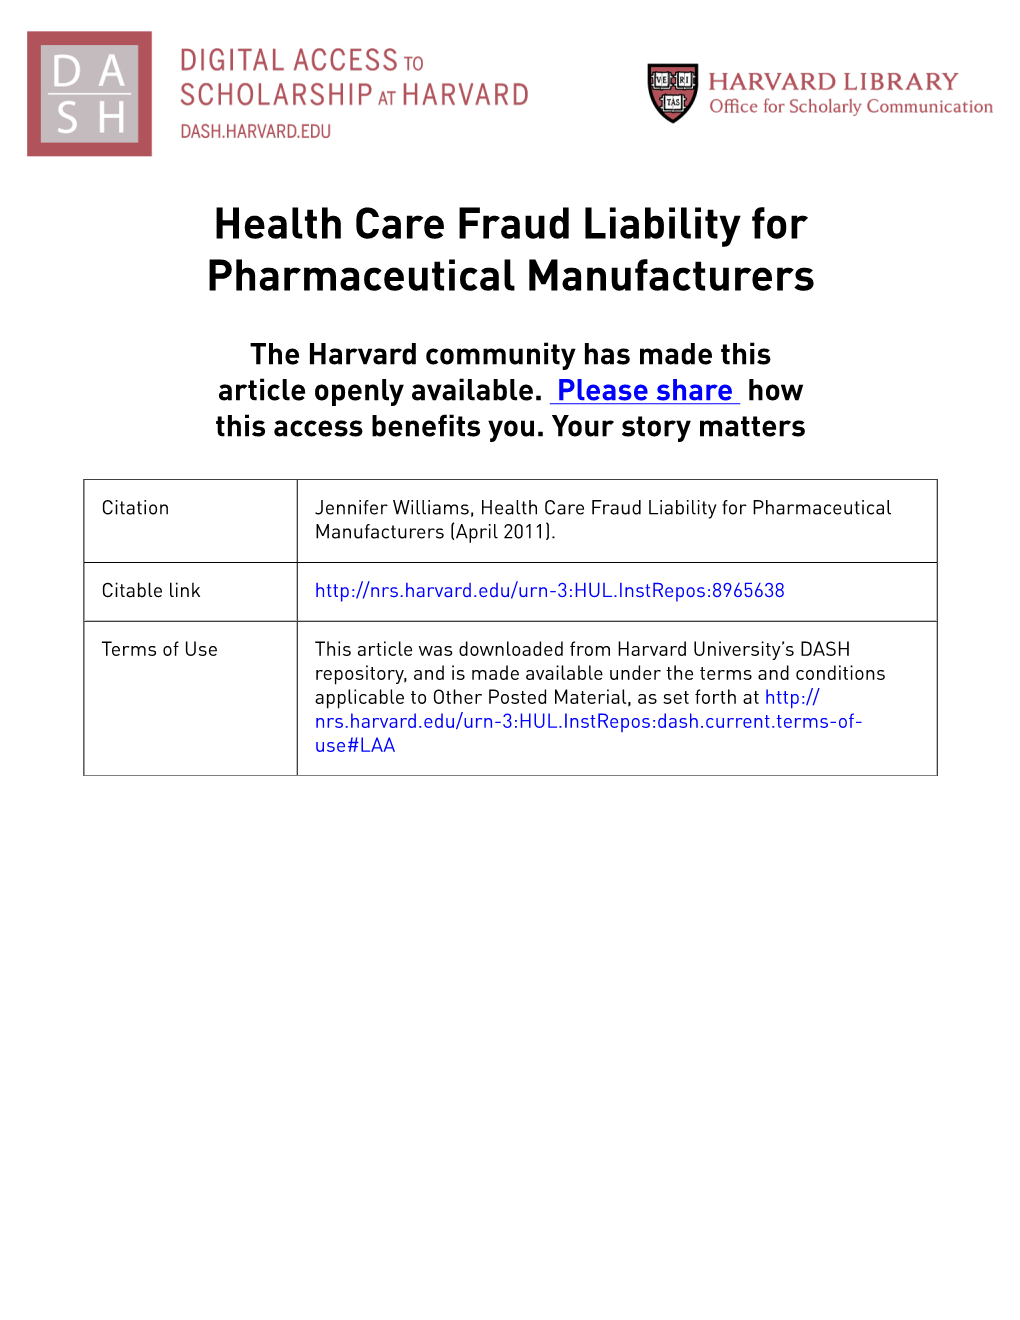 Health Care Fraud Liability for Pharmaceutical Manufacturers